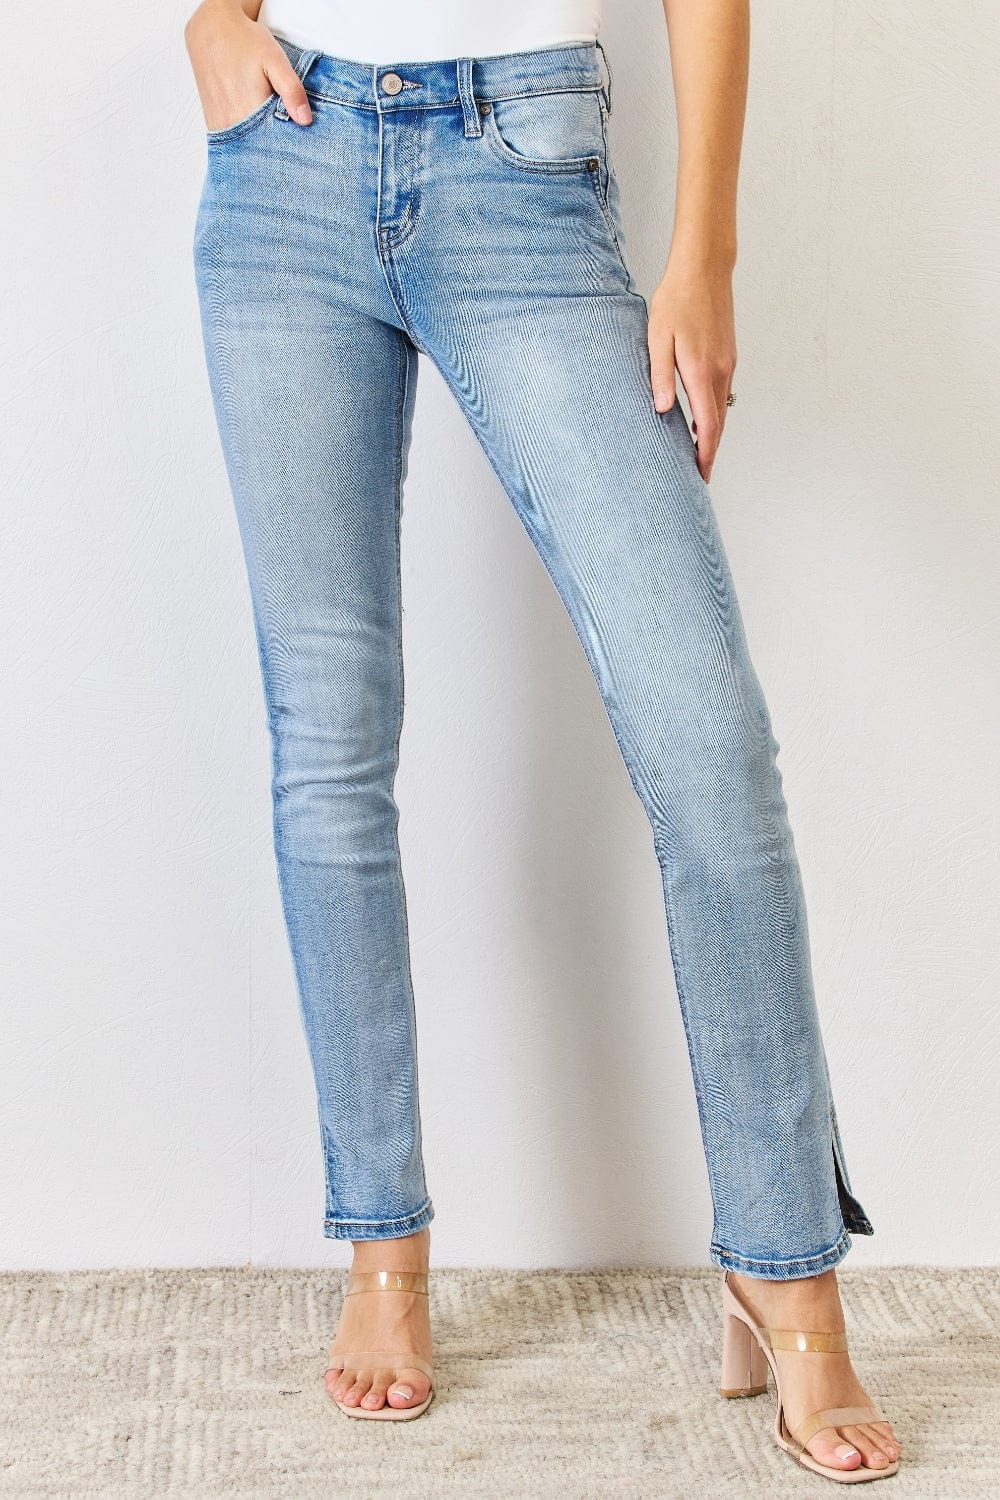 The802Gypsy Bottoms/Jeans Medium / 1(24) ❤️GYPSY-Kancan-Mid Rise Y2K Slit Bootcut Jeans